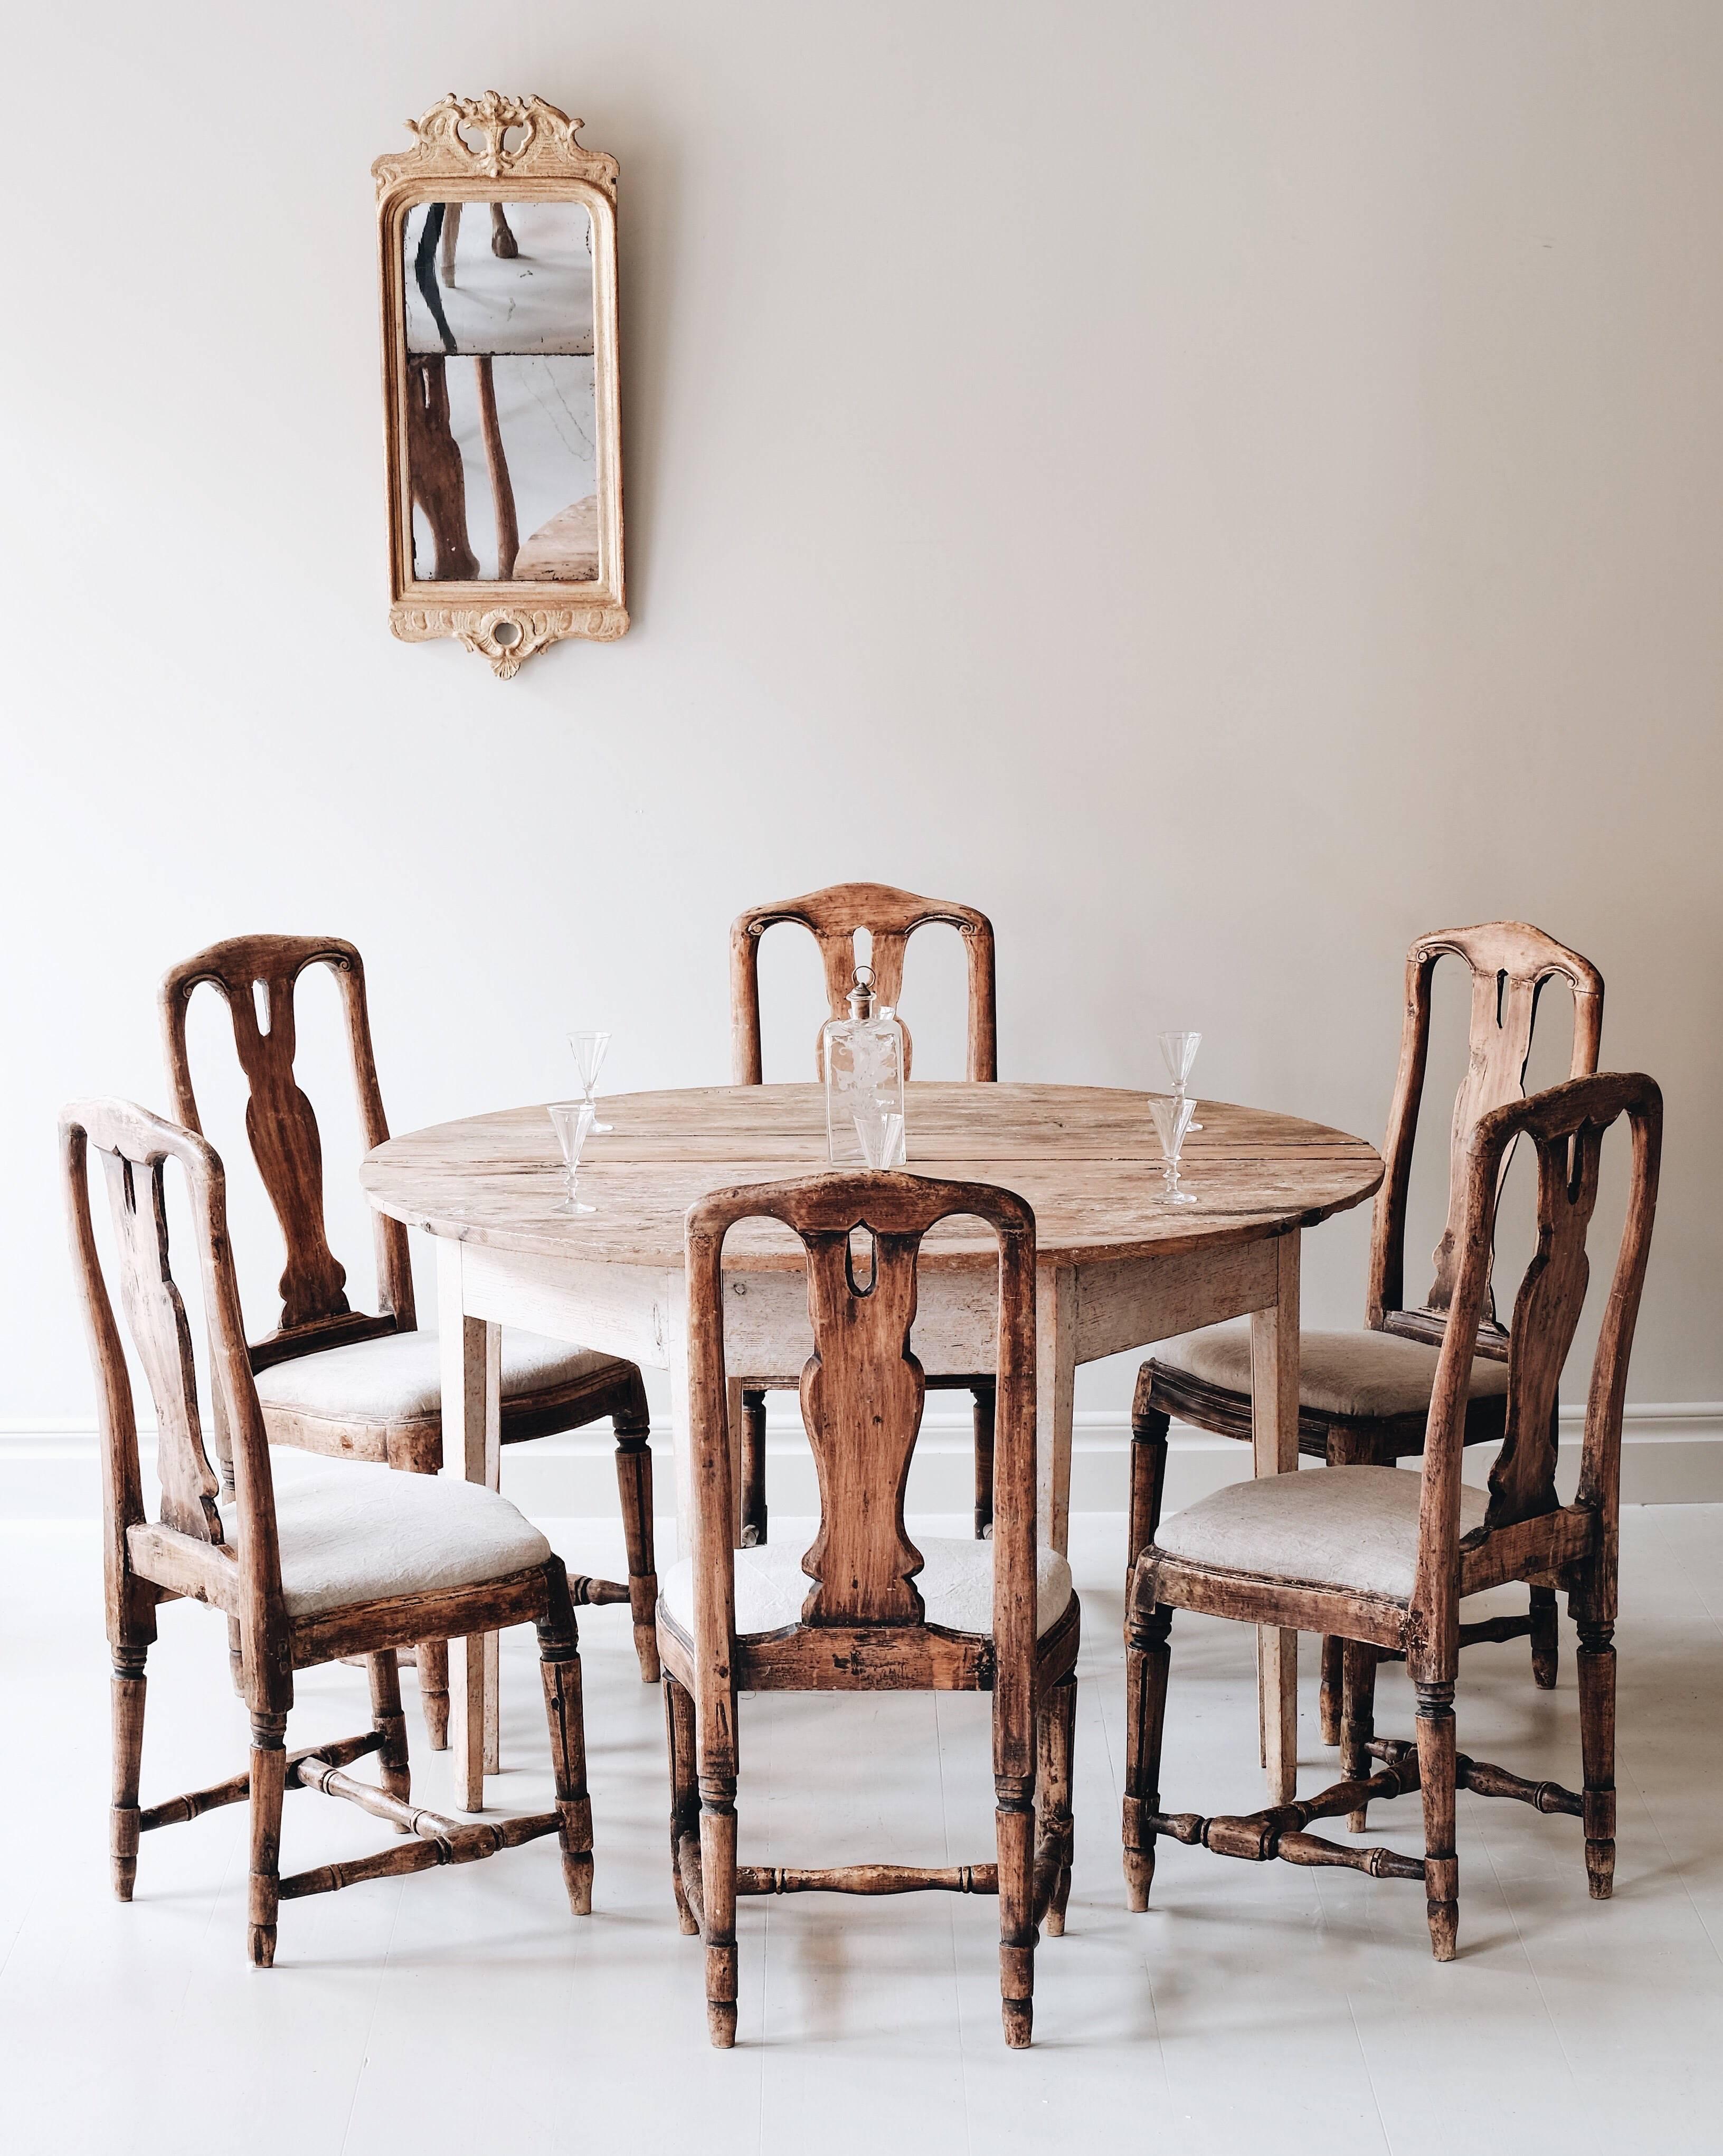 Fine set of six 18th century transitional late Baroque / Gustavian chairs in original color, Stockholm Sweden, circa 1775. Signed MLB, master chair maker Melchior Lundberg. (1774-1812) 

Literature: Lars Sjoberg, 